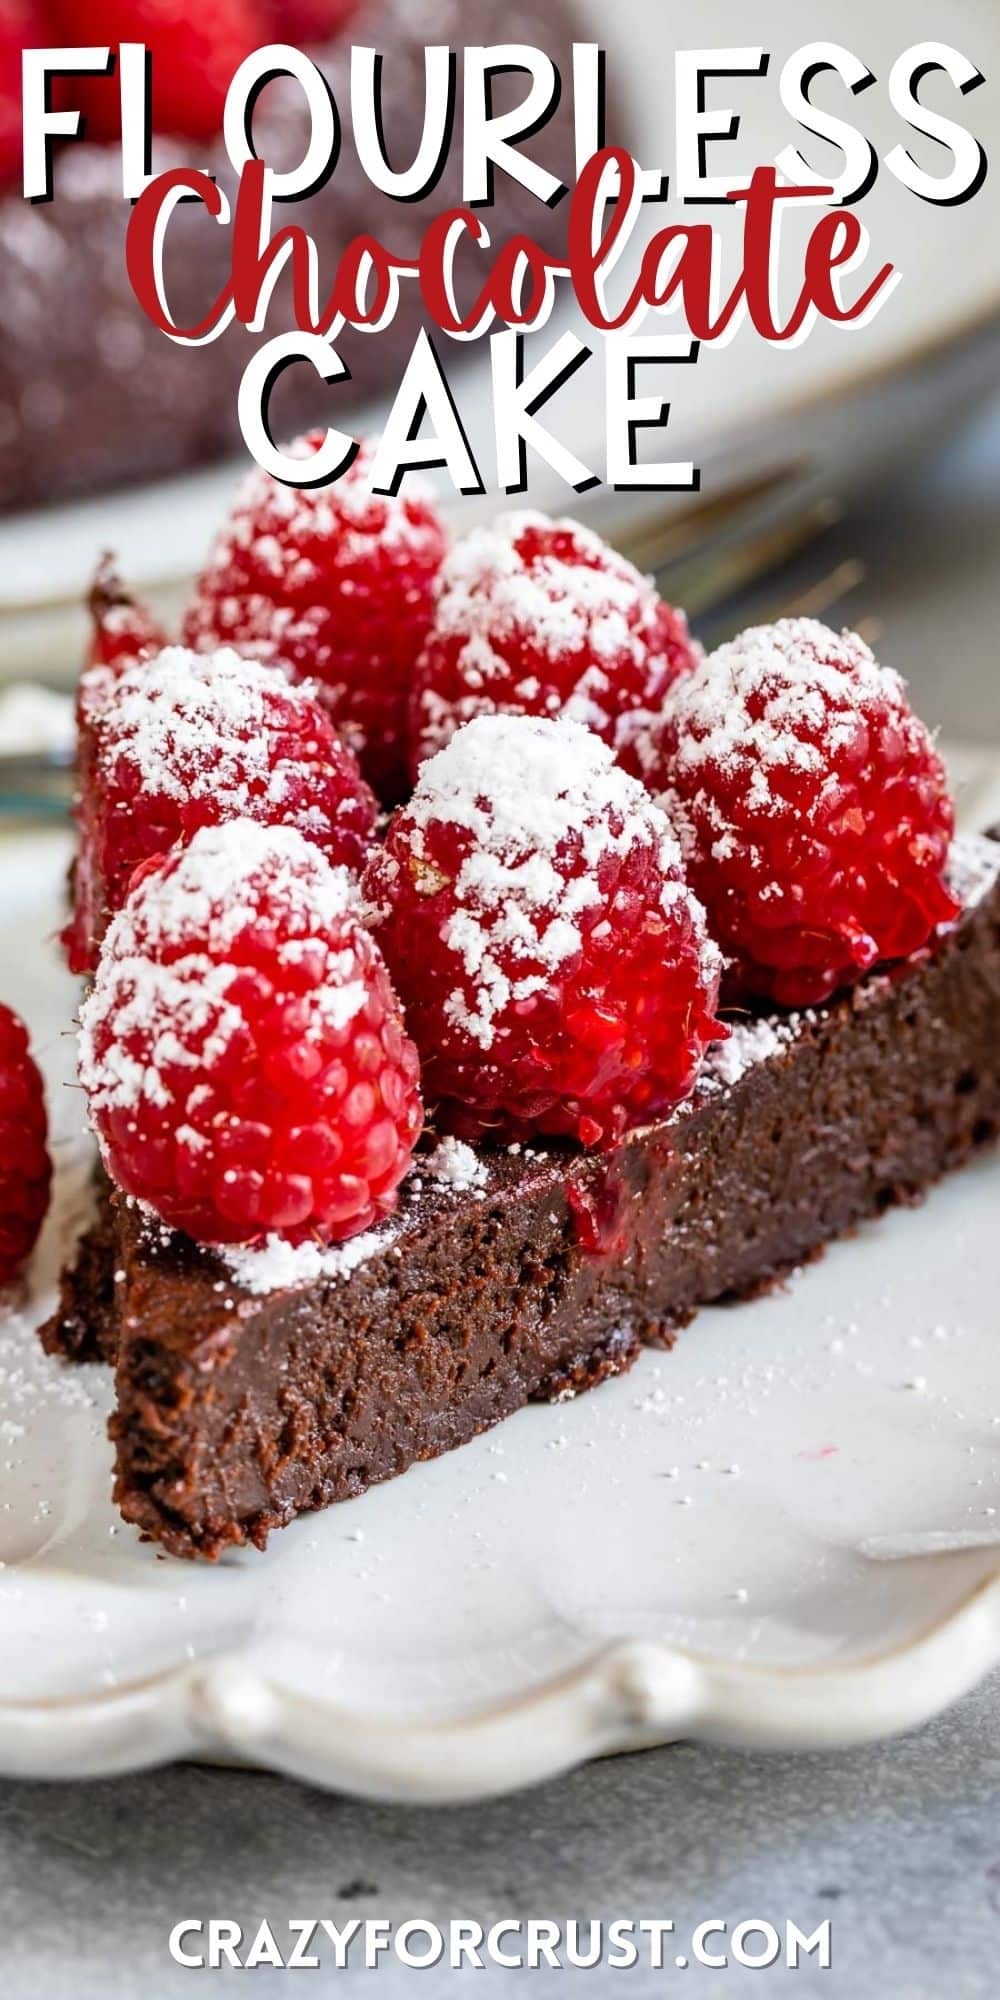 triangle shaped chocolate cake sitting on a grey plate topped with raspberries with words on the image.